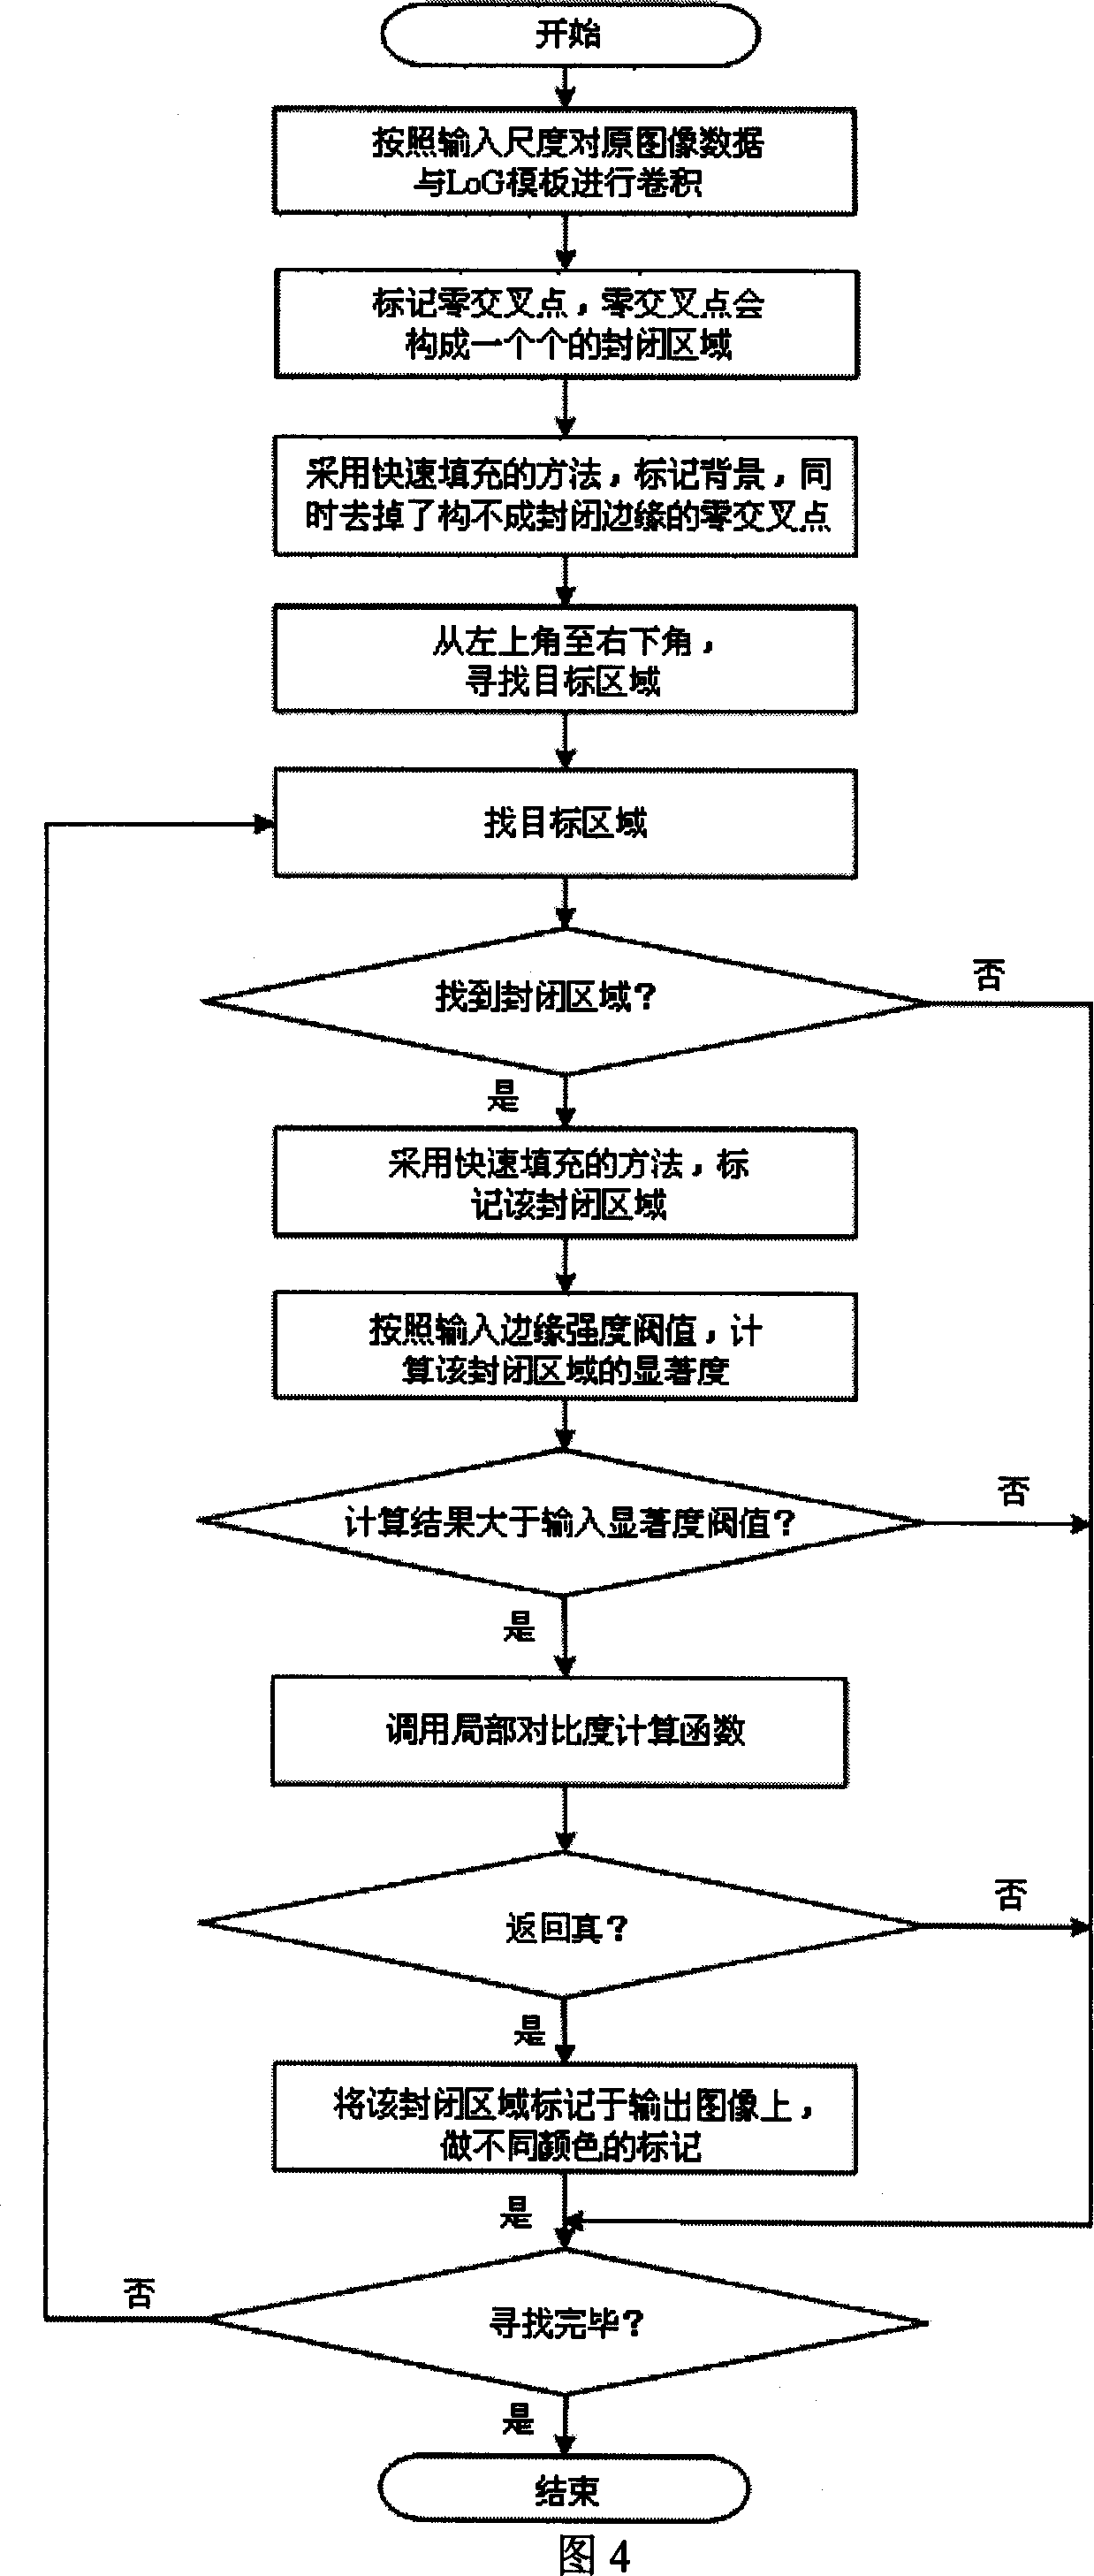 X-ray detecting method for printed circuit board defect